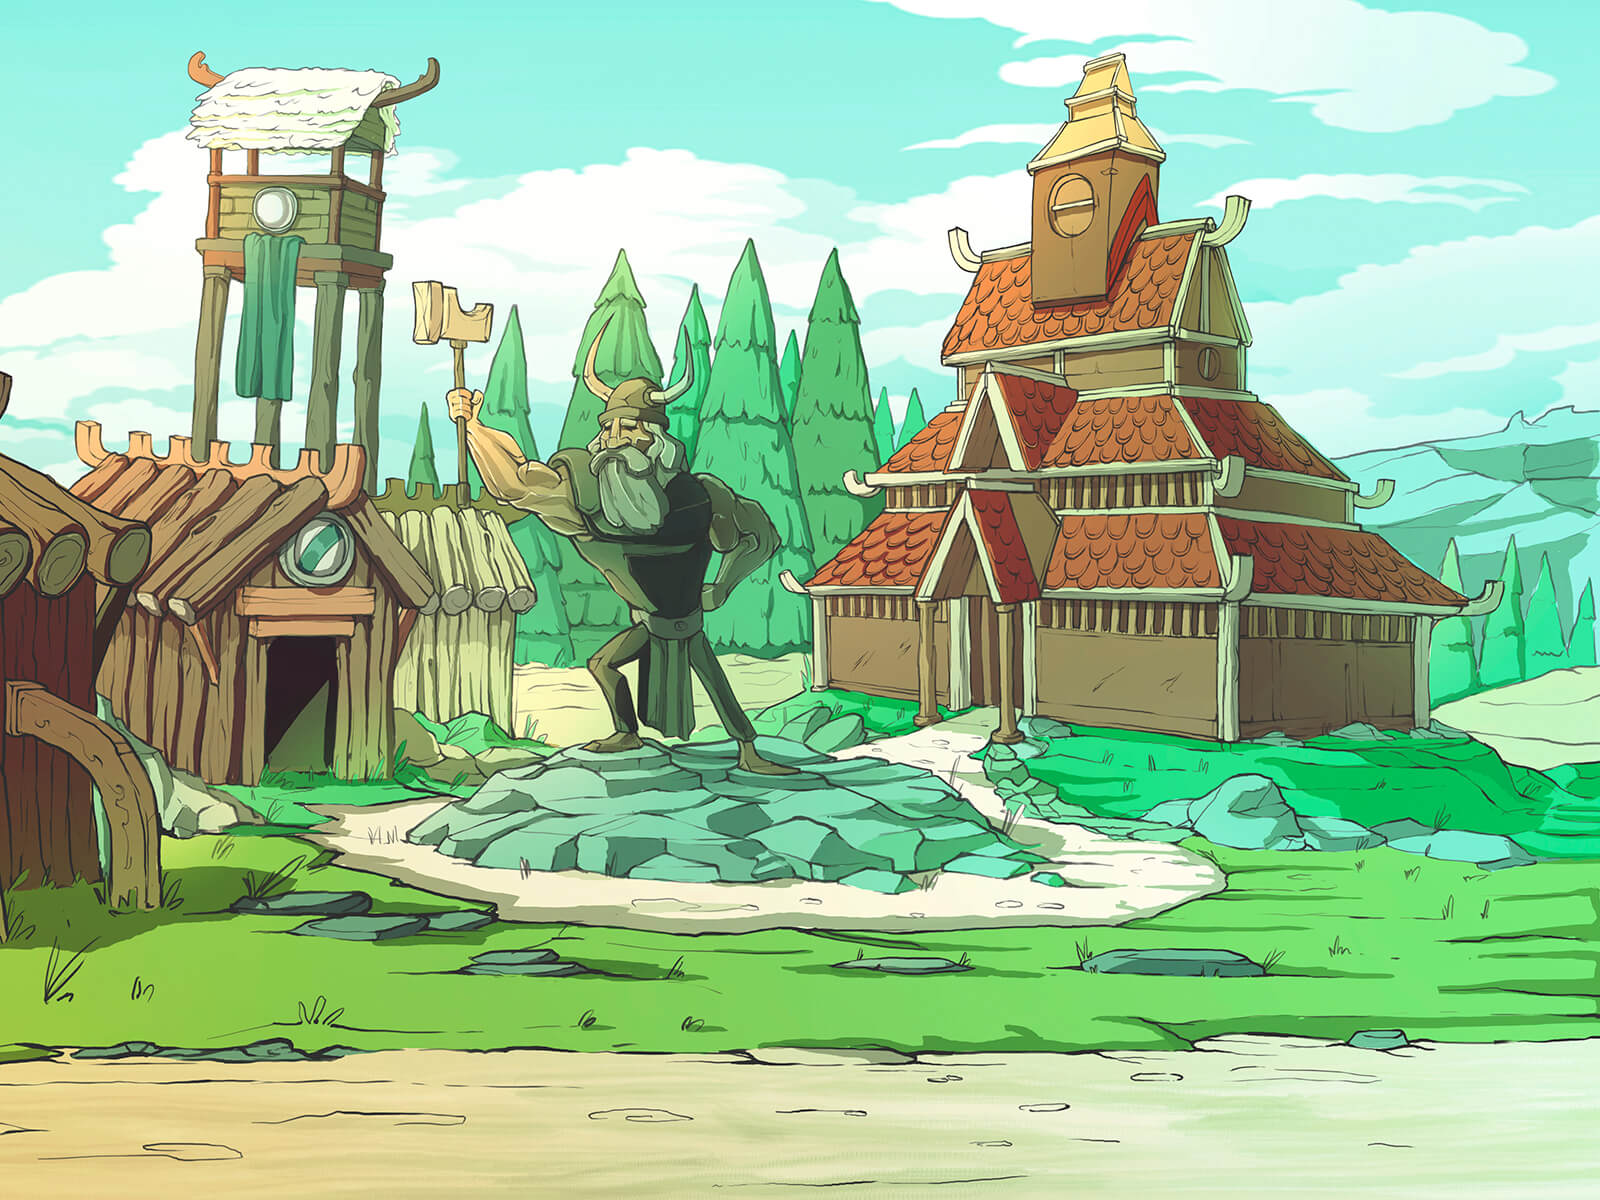 Cartoon-style depiction of an ancient viking village with wooden huts, a longboat, and a statue of a hammer-wielding warrior.